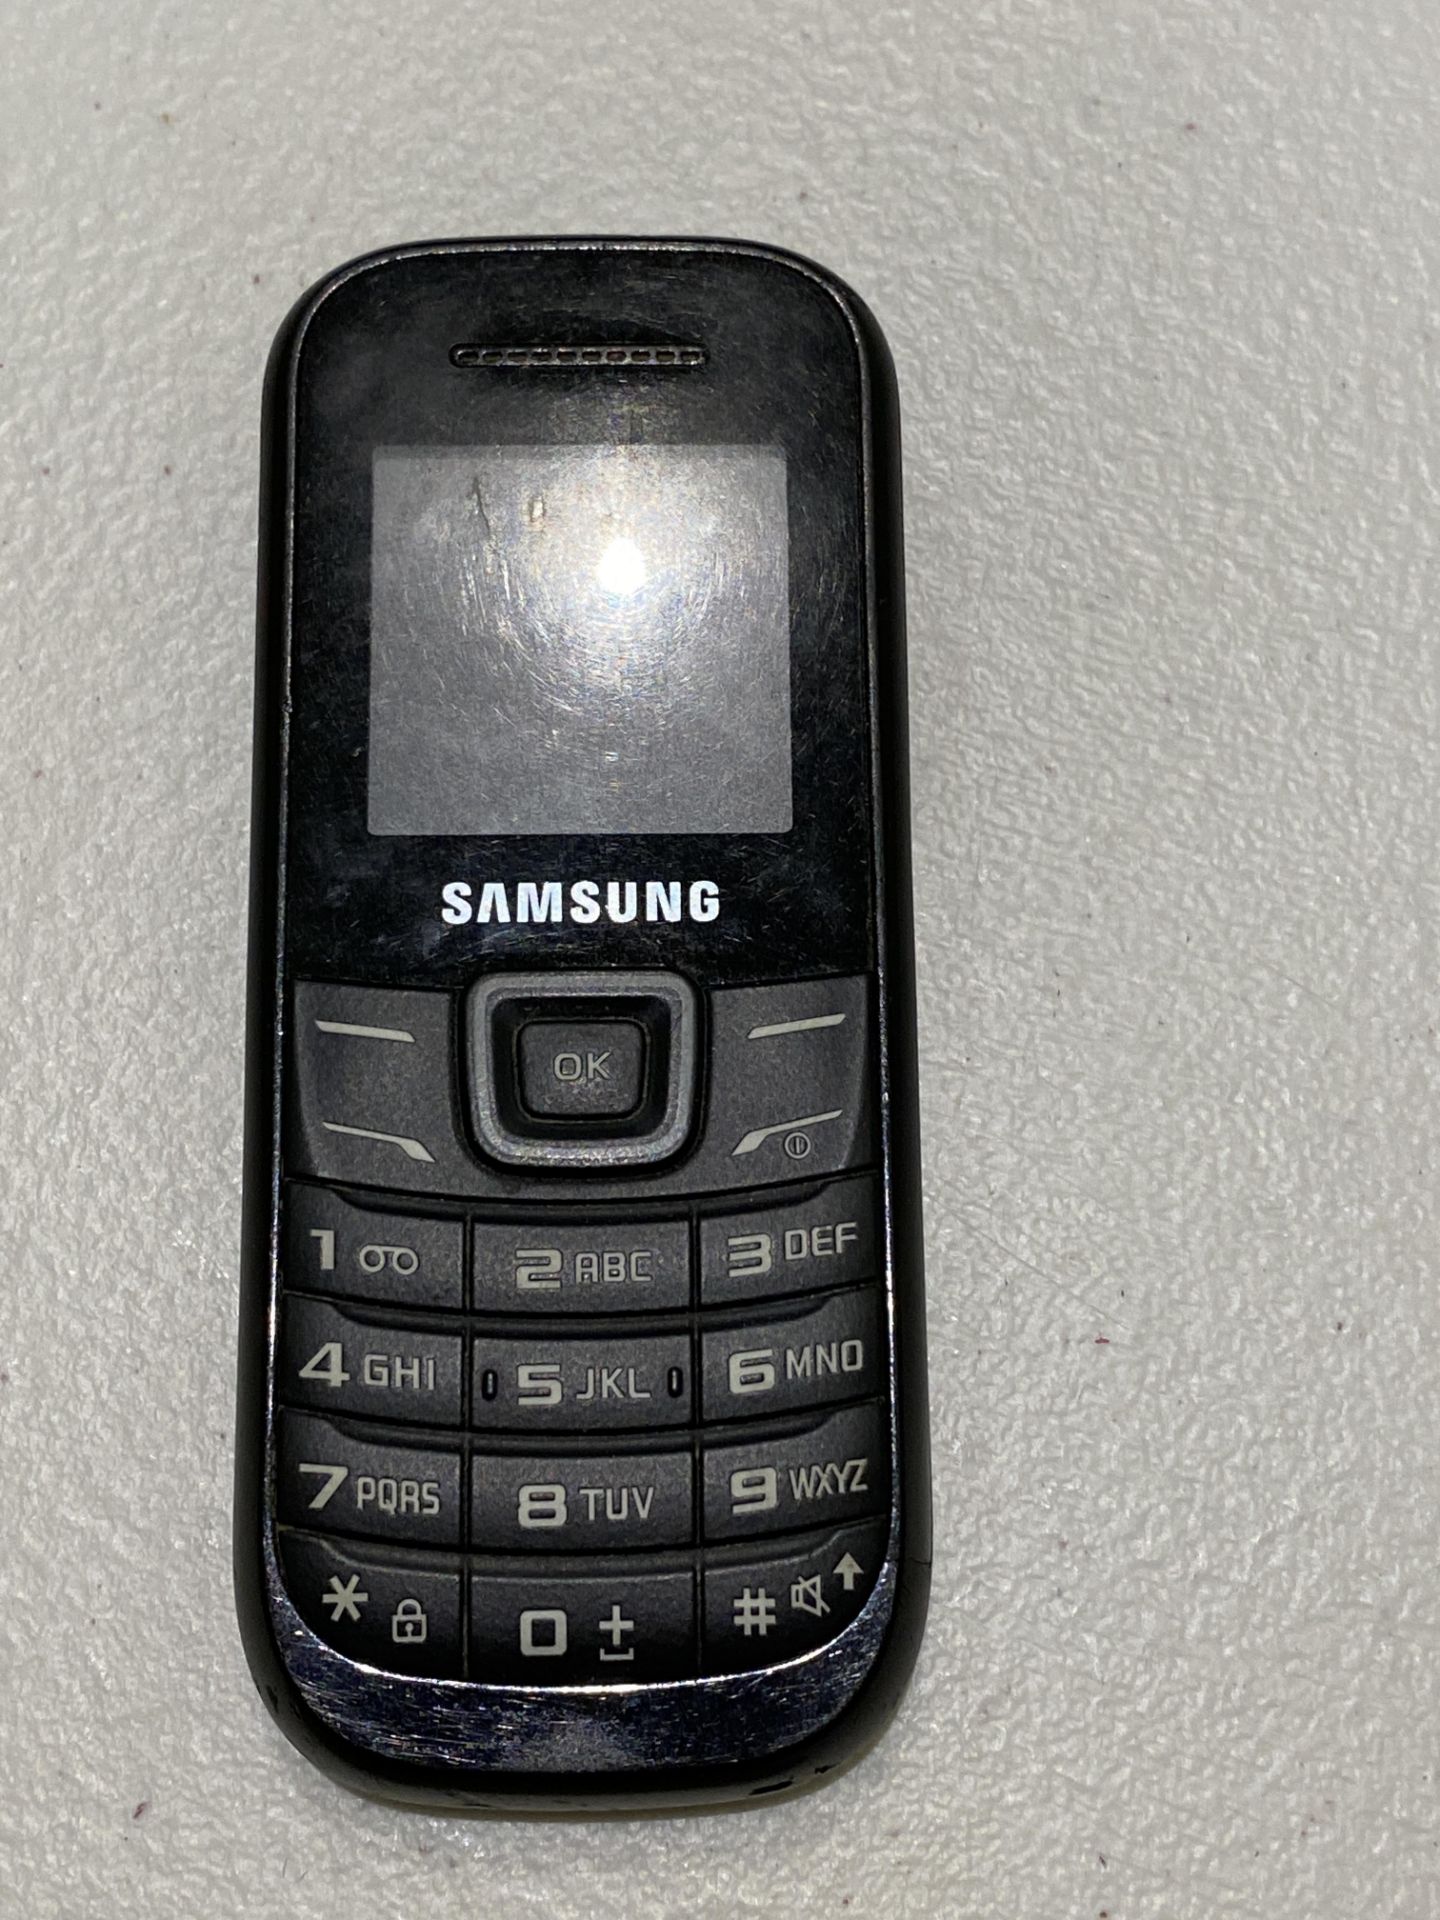 Samsung Mobile Phone - No Charger